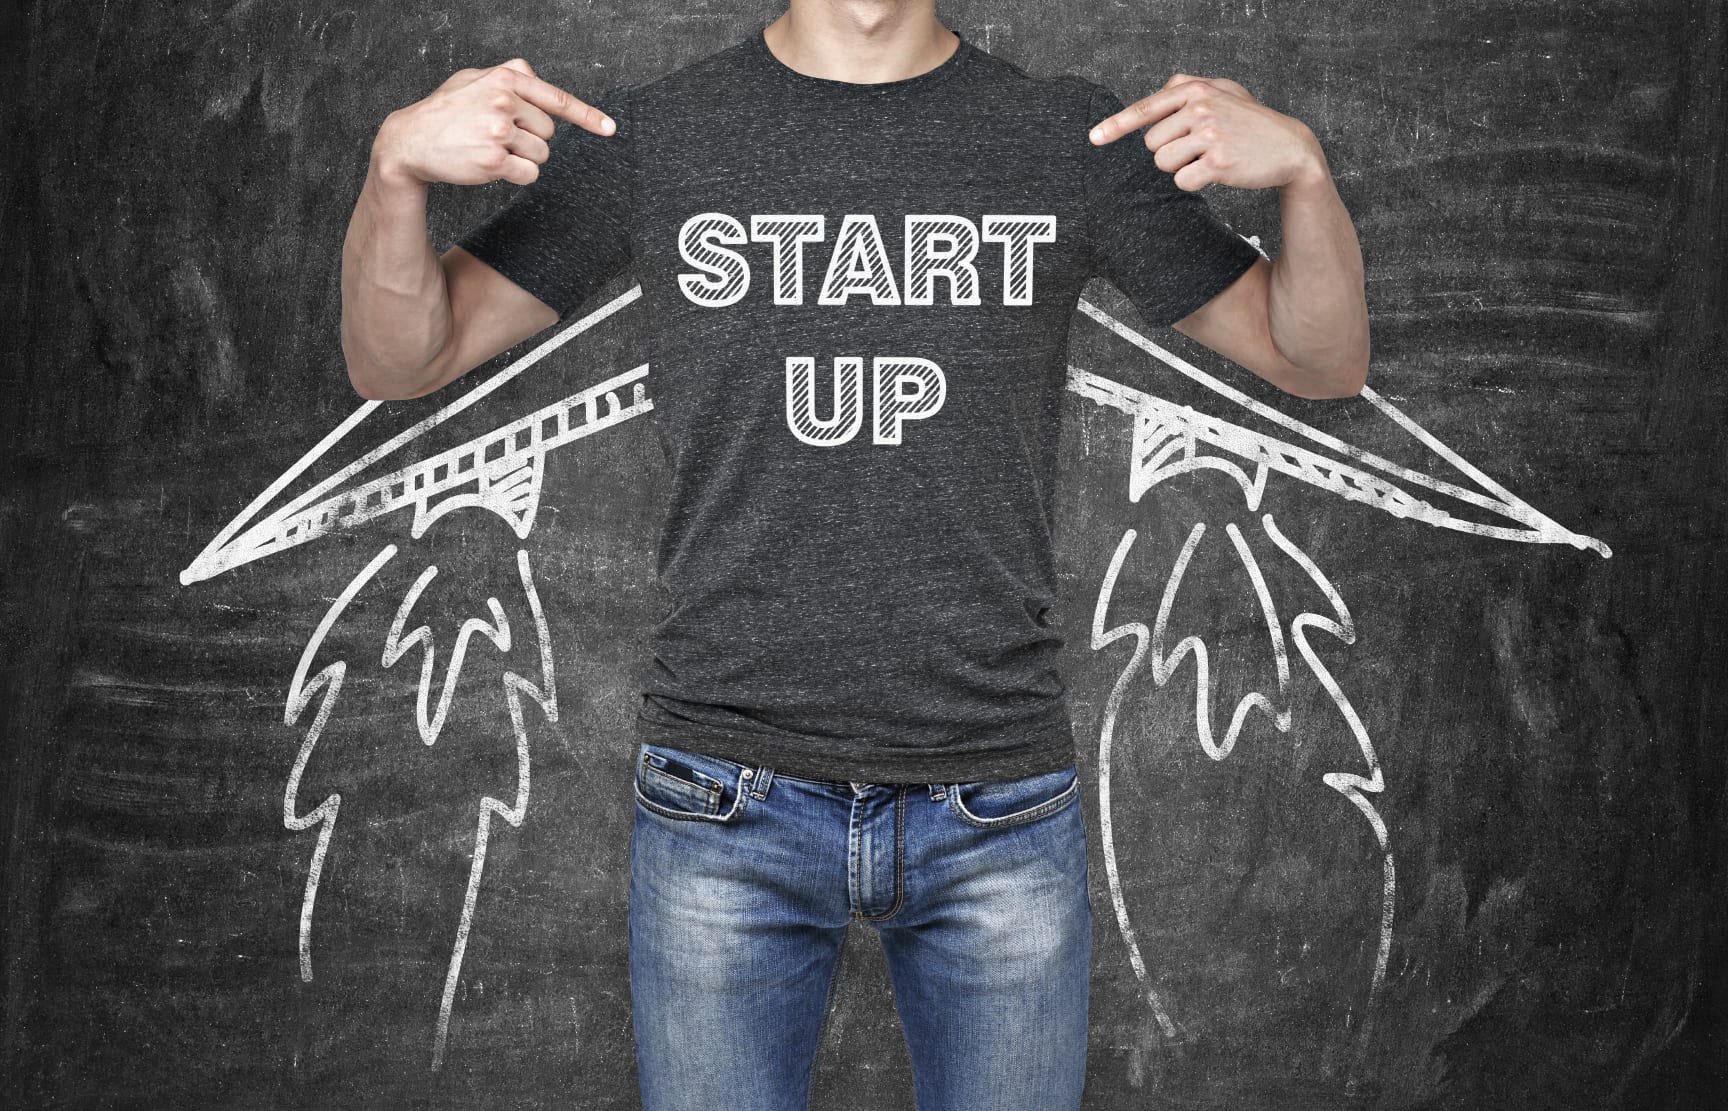 Startup or Small Business: Which One Are You?